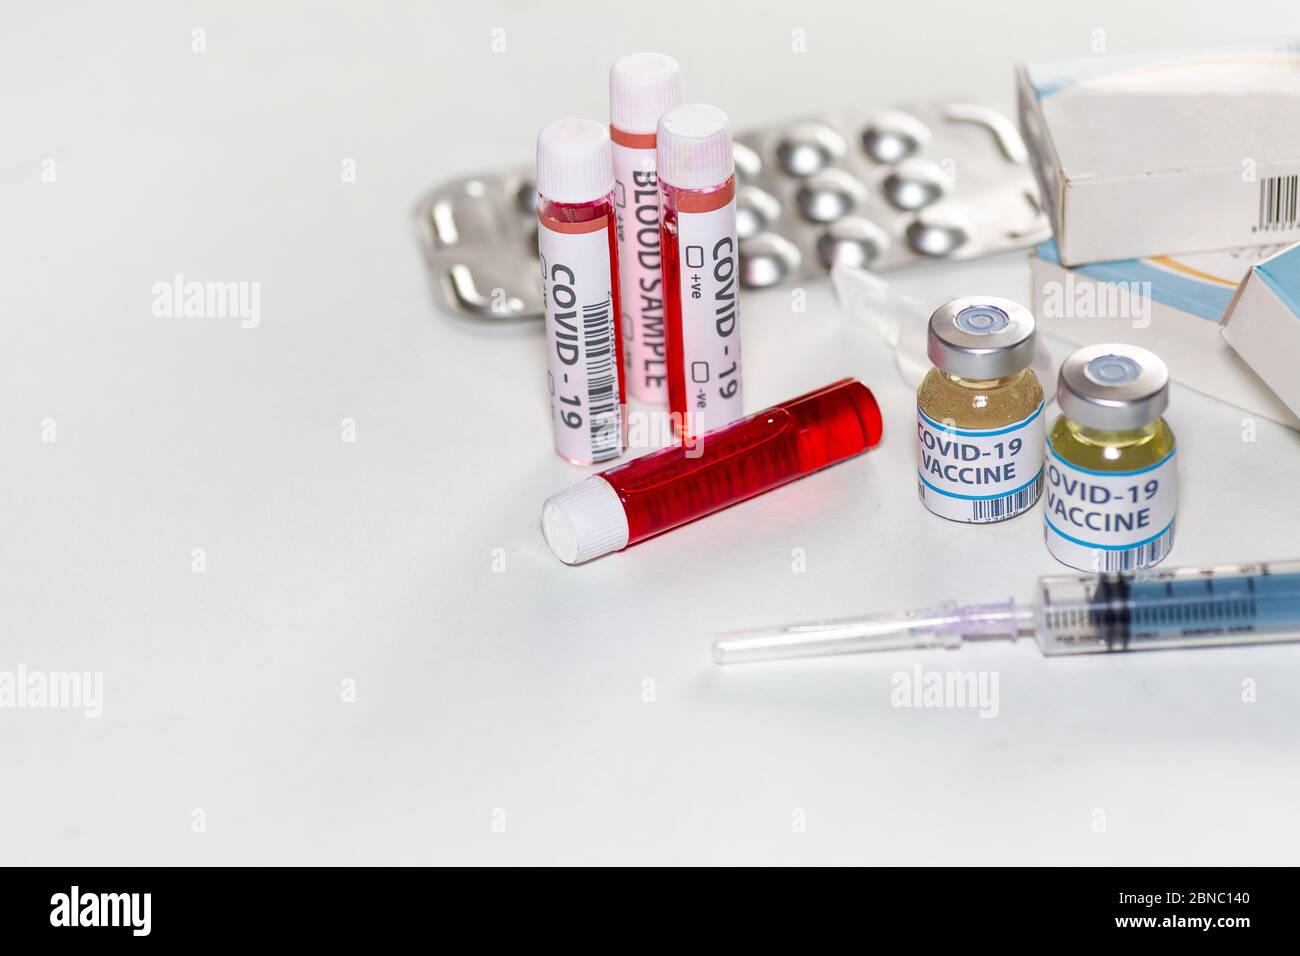 Vaccine bottles with injection syringe, blood sample vials and medical drugs at a healthcare center for detection and treatment of Coronavirus patient Stock Photo